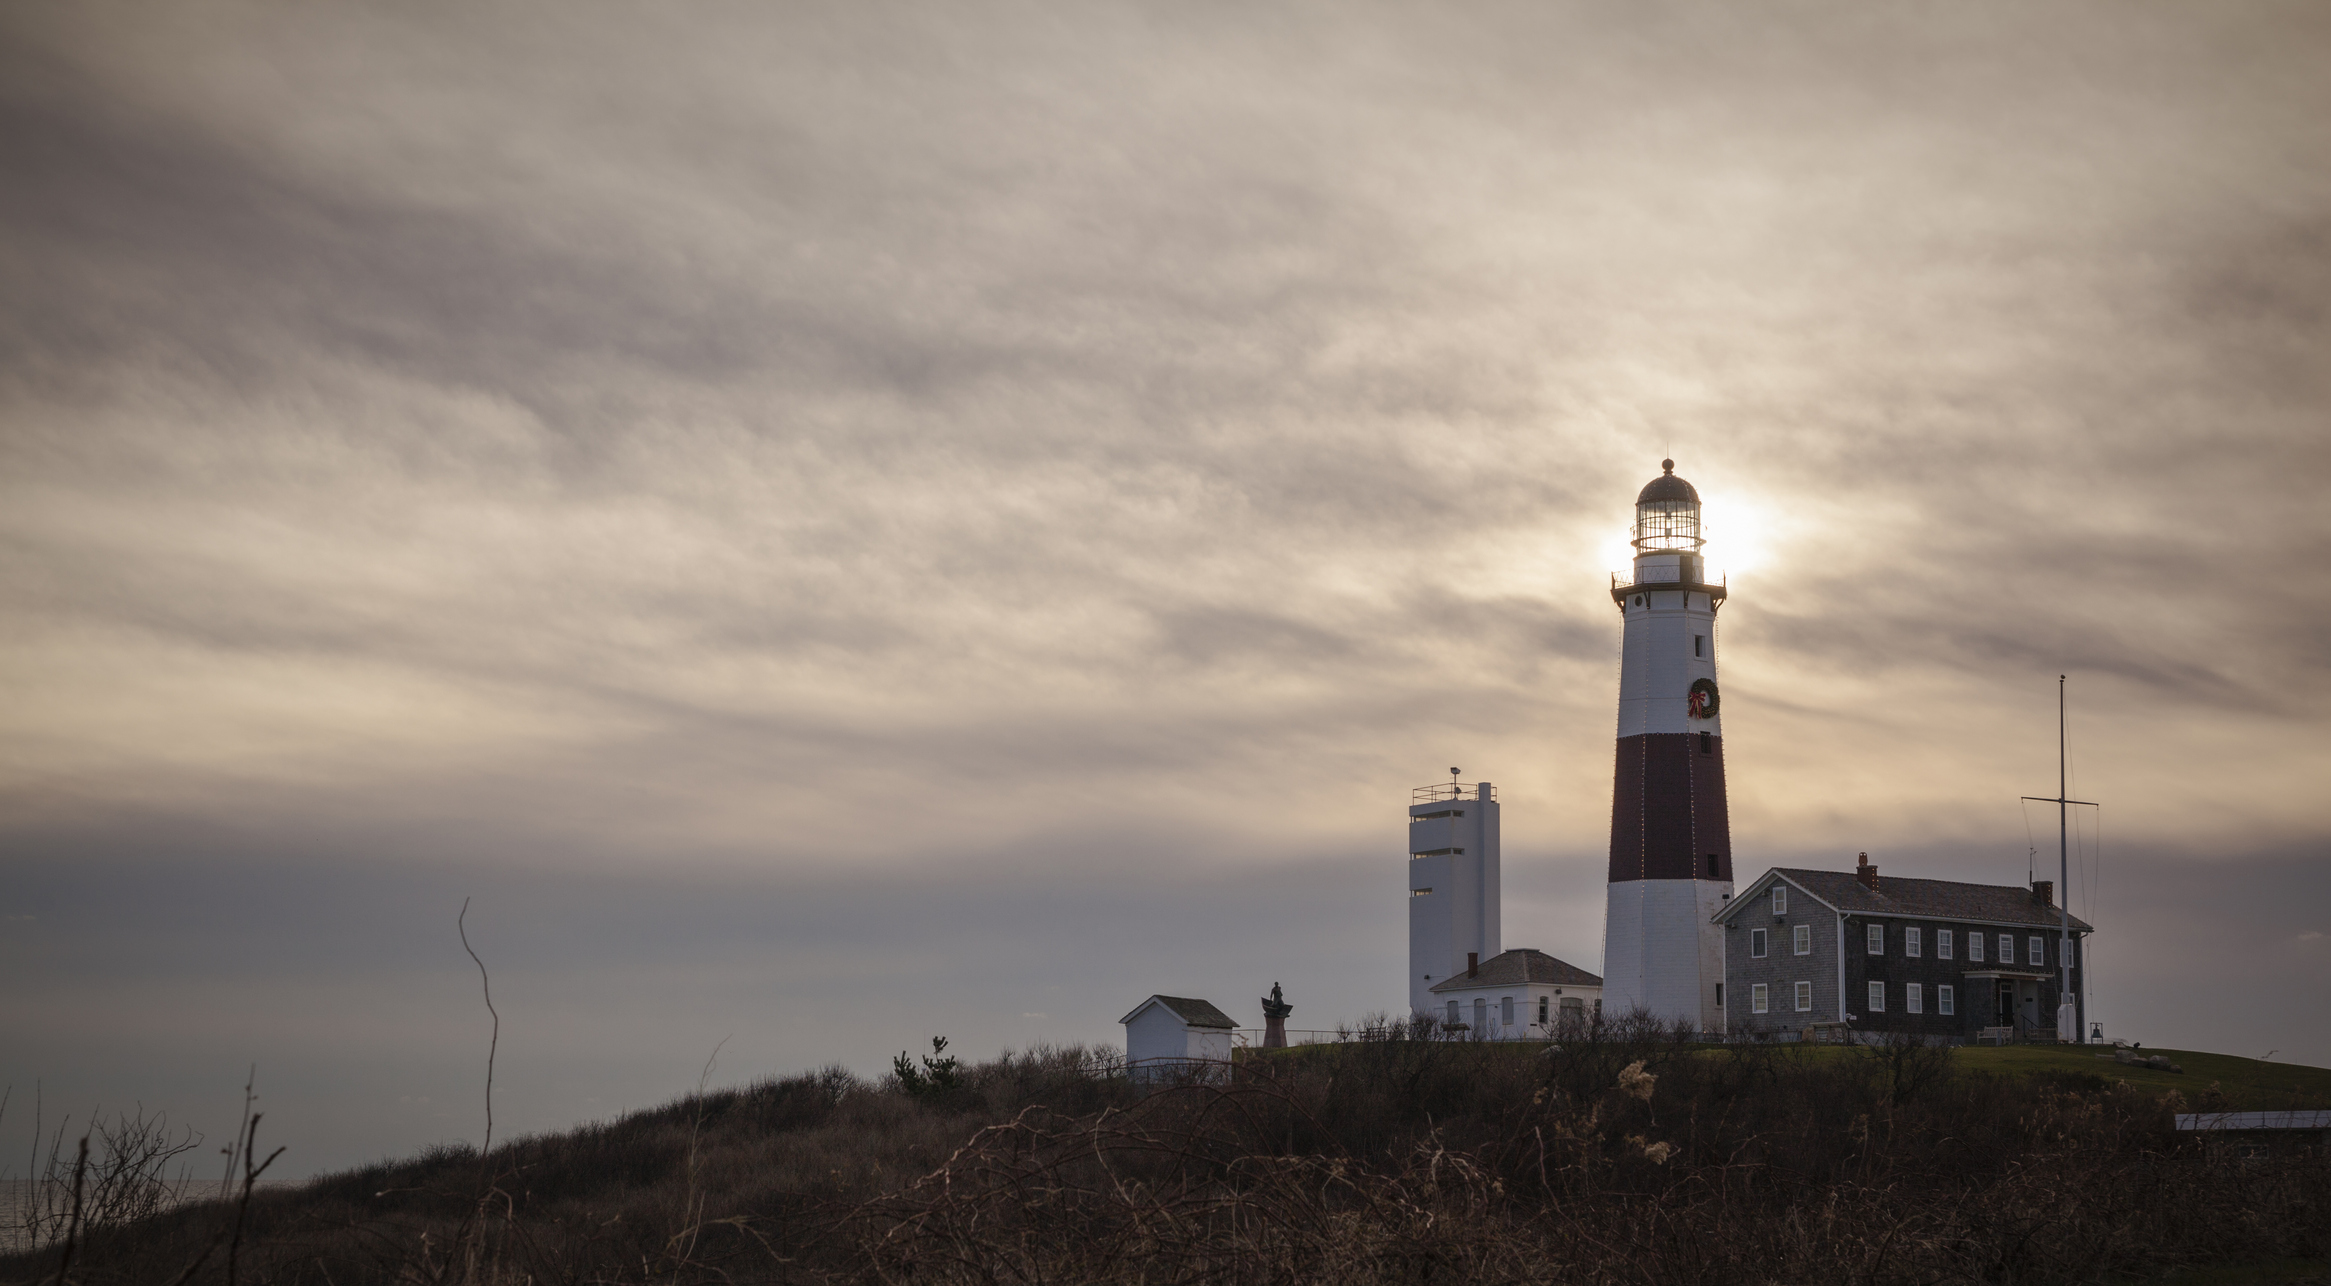 A lighthouse at the top of a hill on a gloomy day, sun barely poking through a sky of gray clouds.